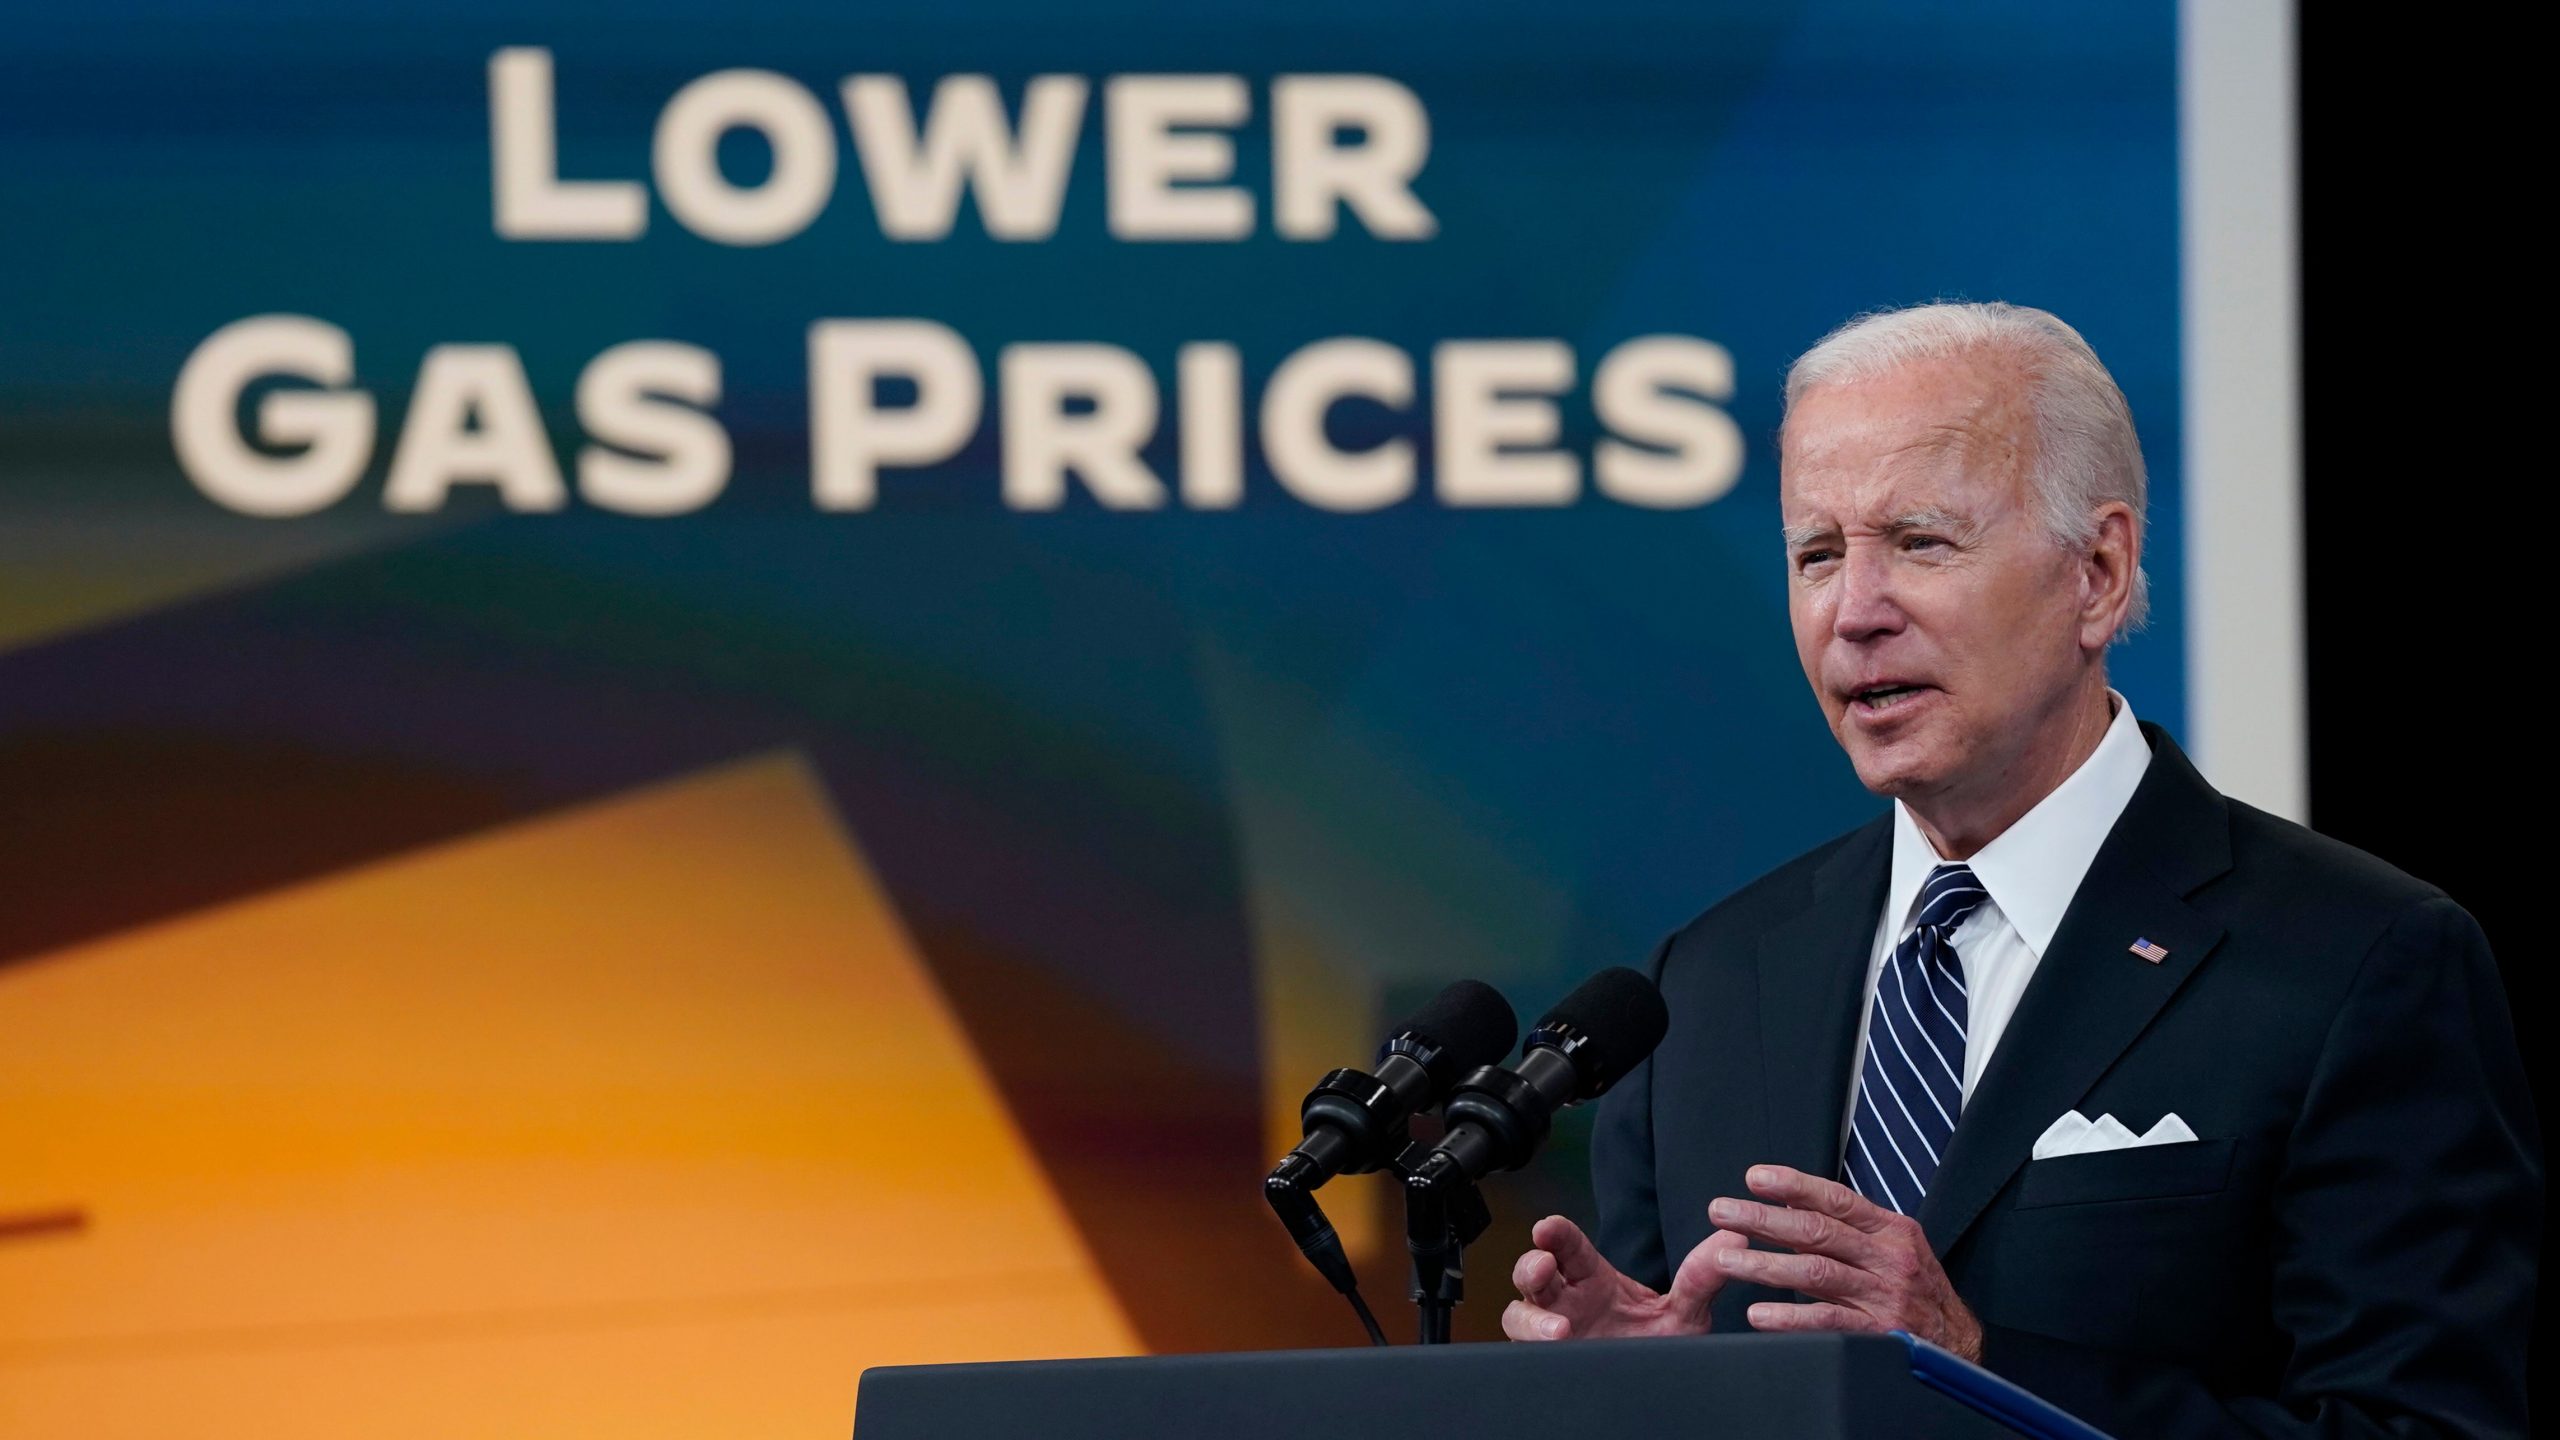 Inflation, gun violence sinks Biden’s approval rating to record low: Report